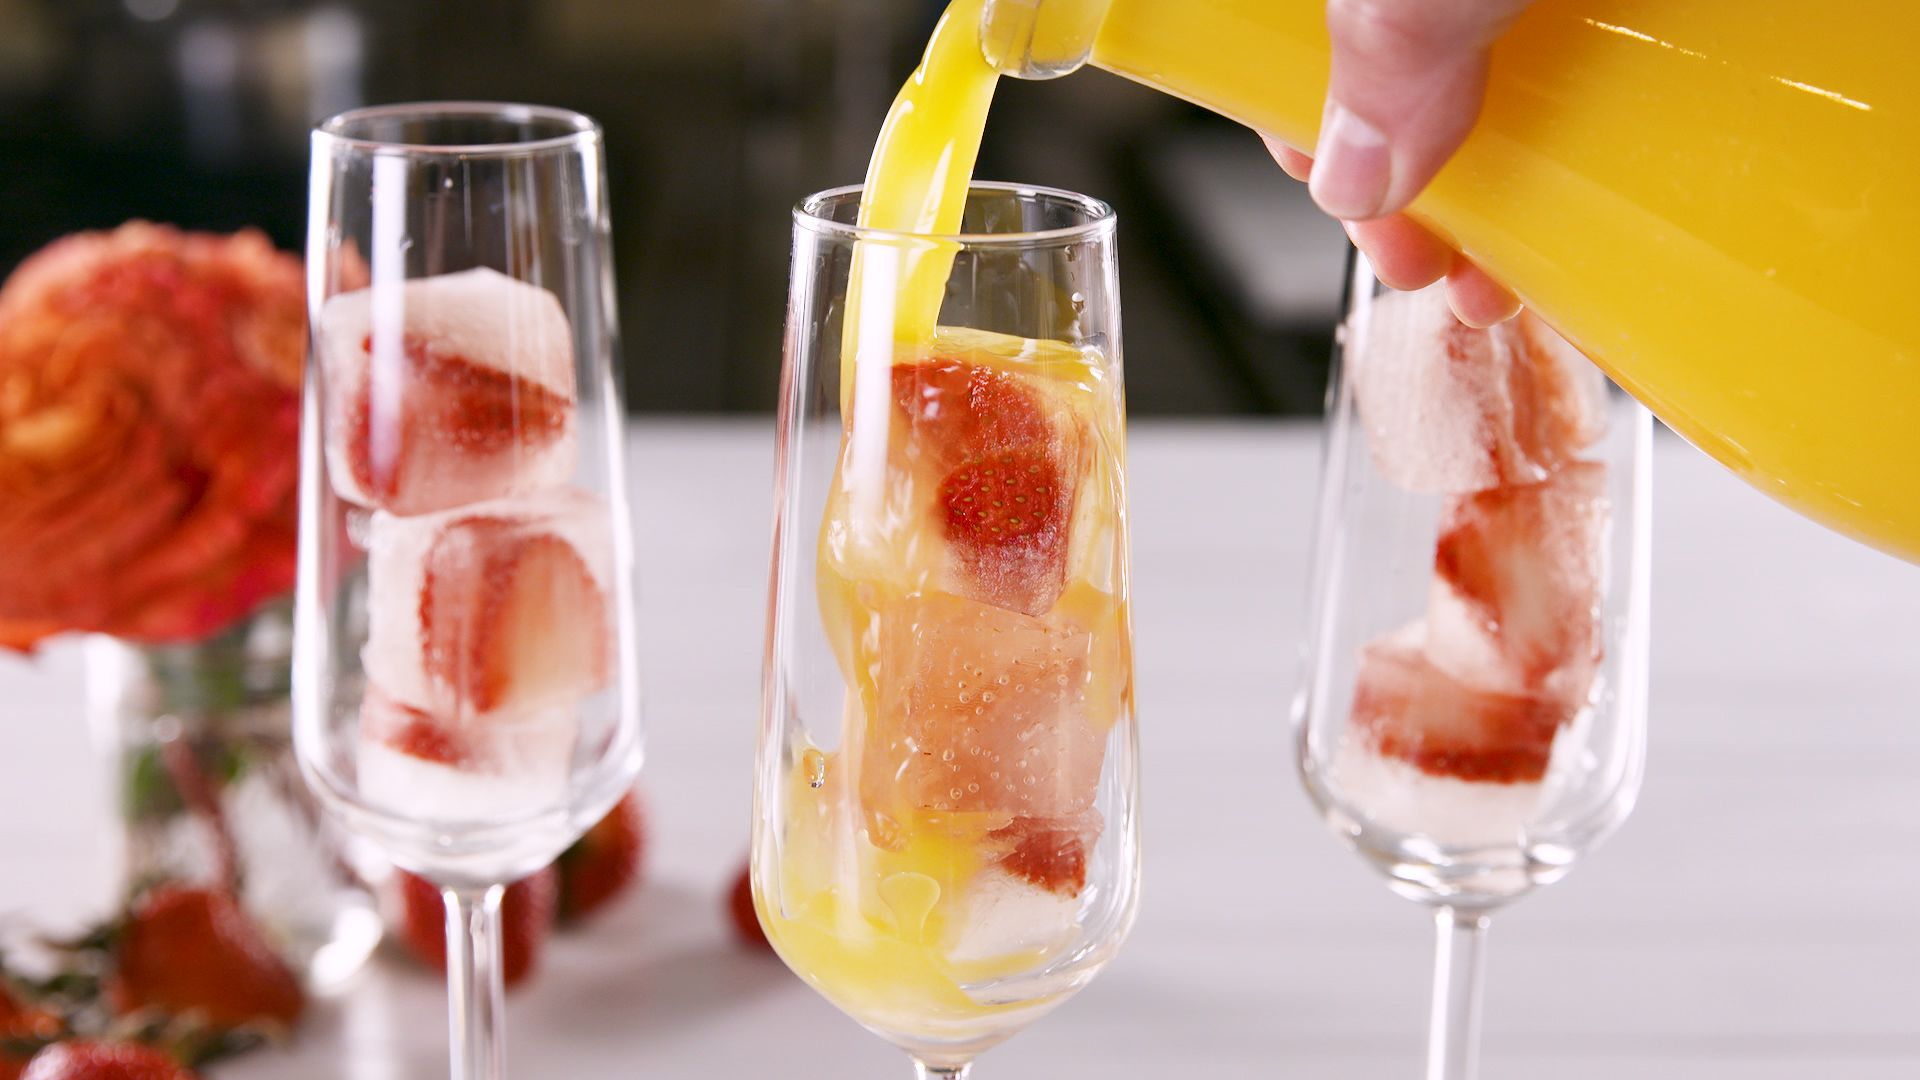 How To Make Fruit Ice Cubes - Freezing Fruit for Drinks